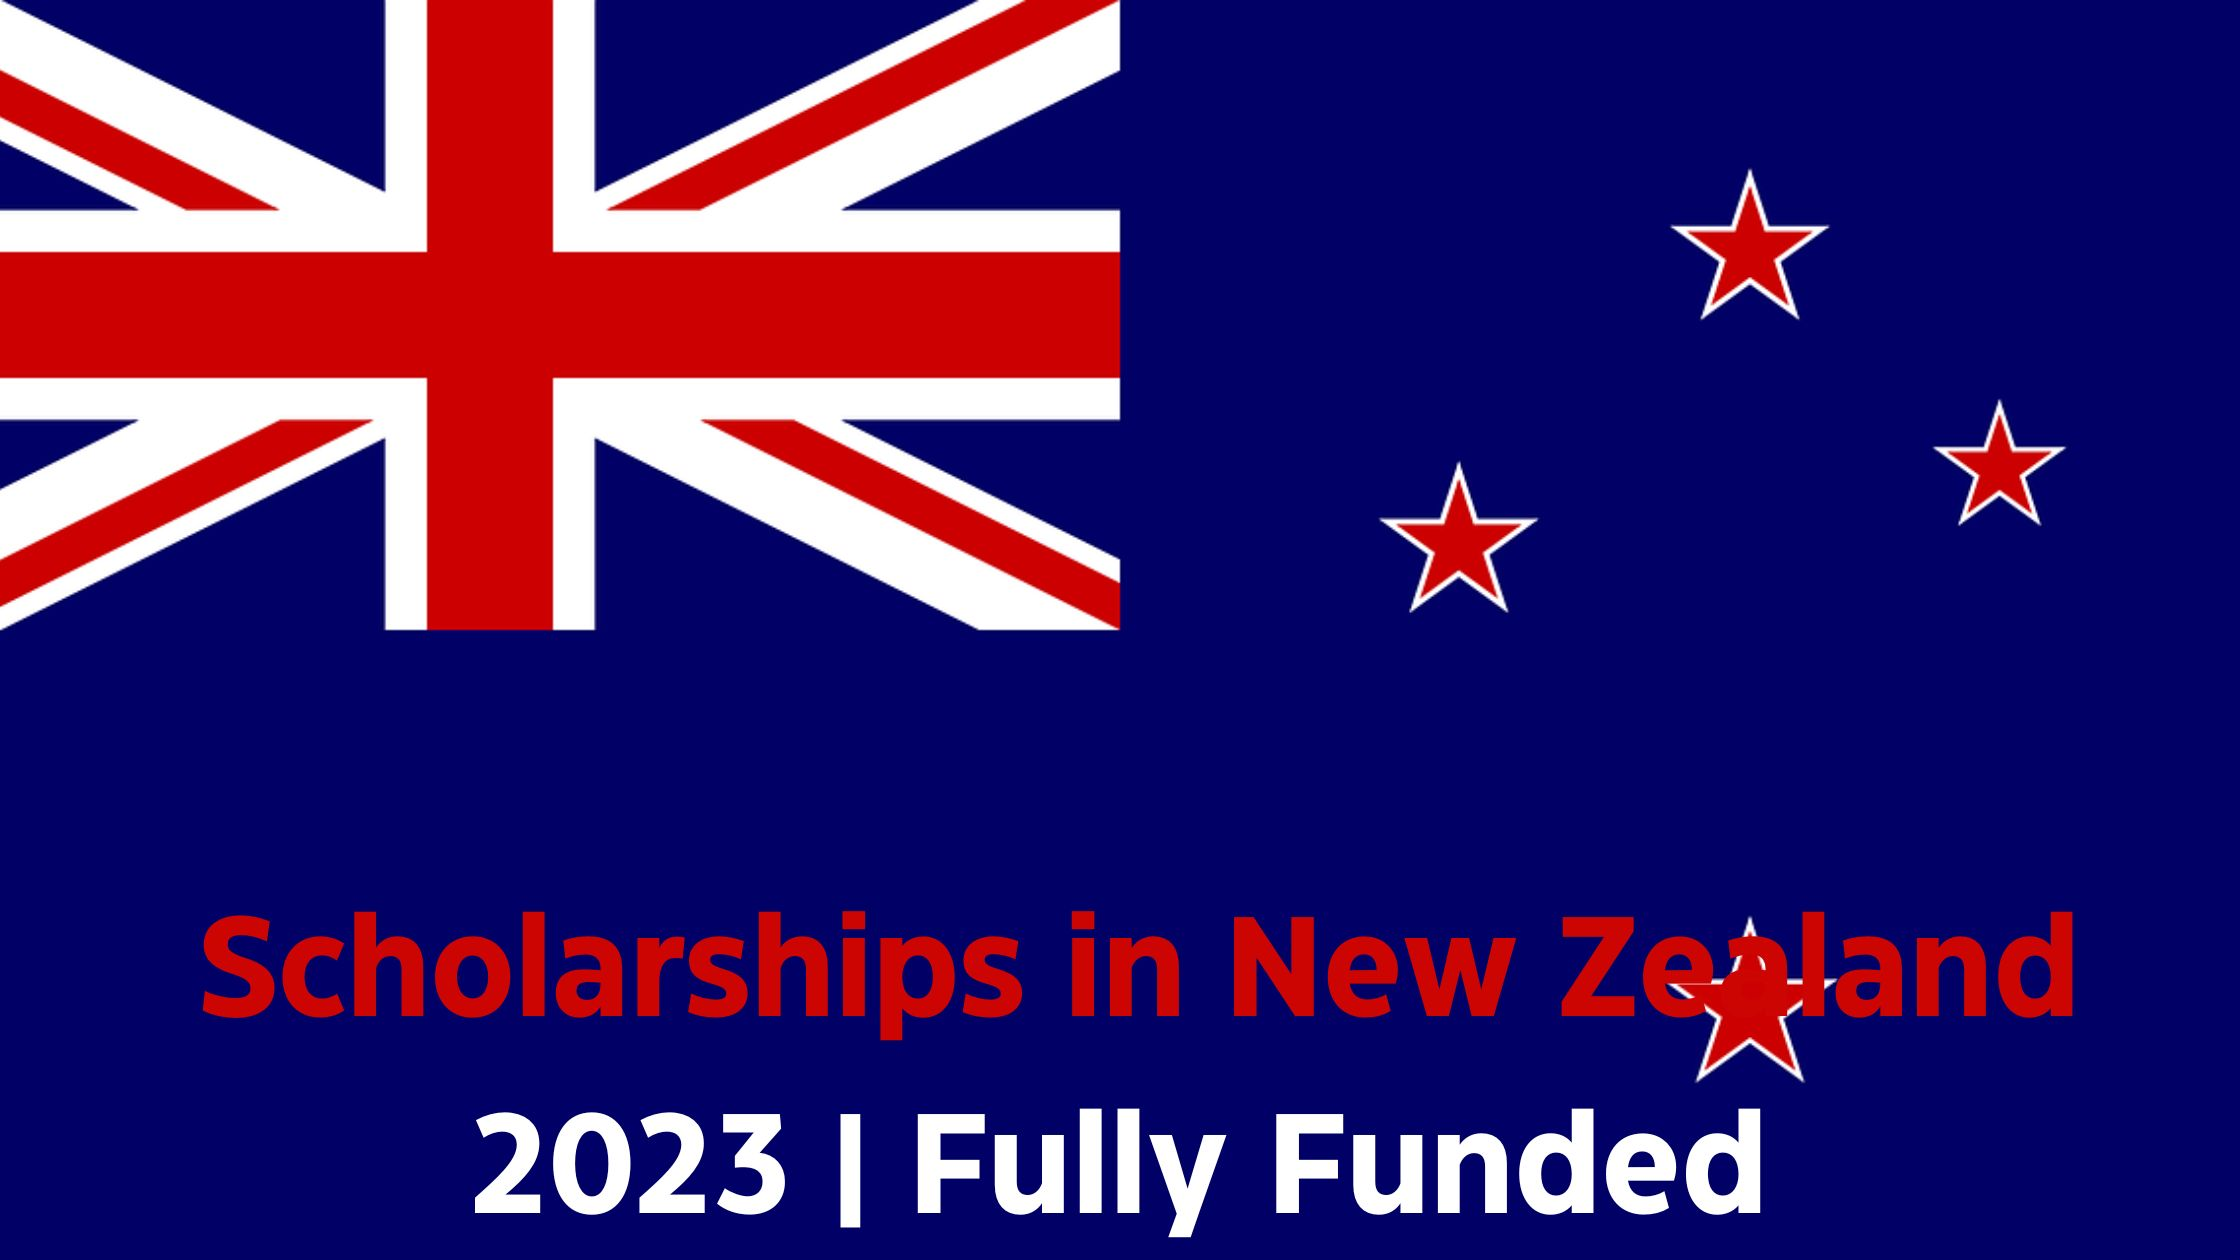 Scholarships in New Zealand 2023 | Fully Funded